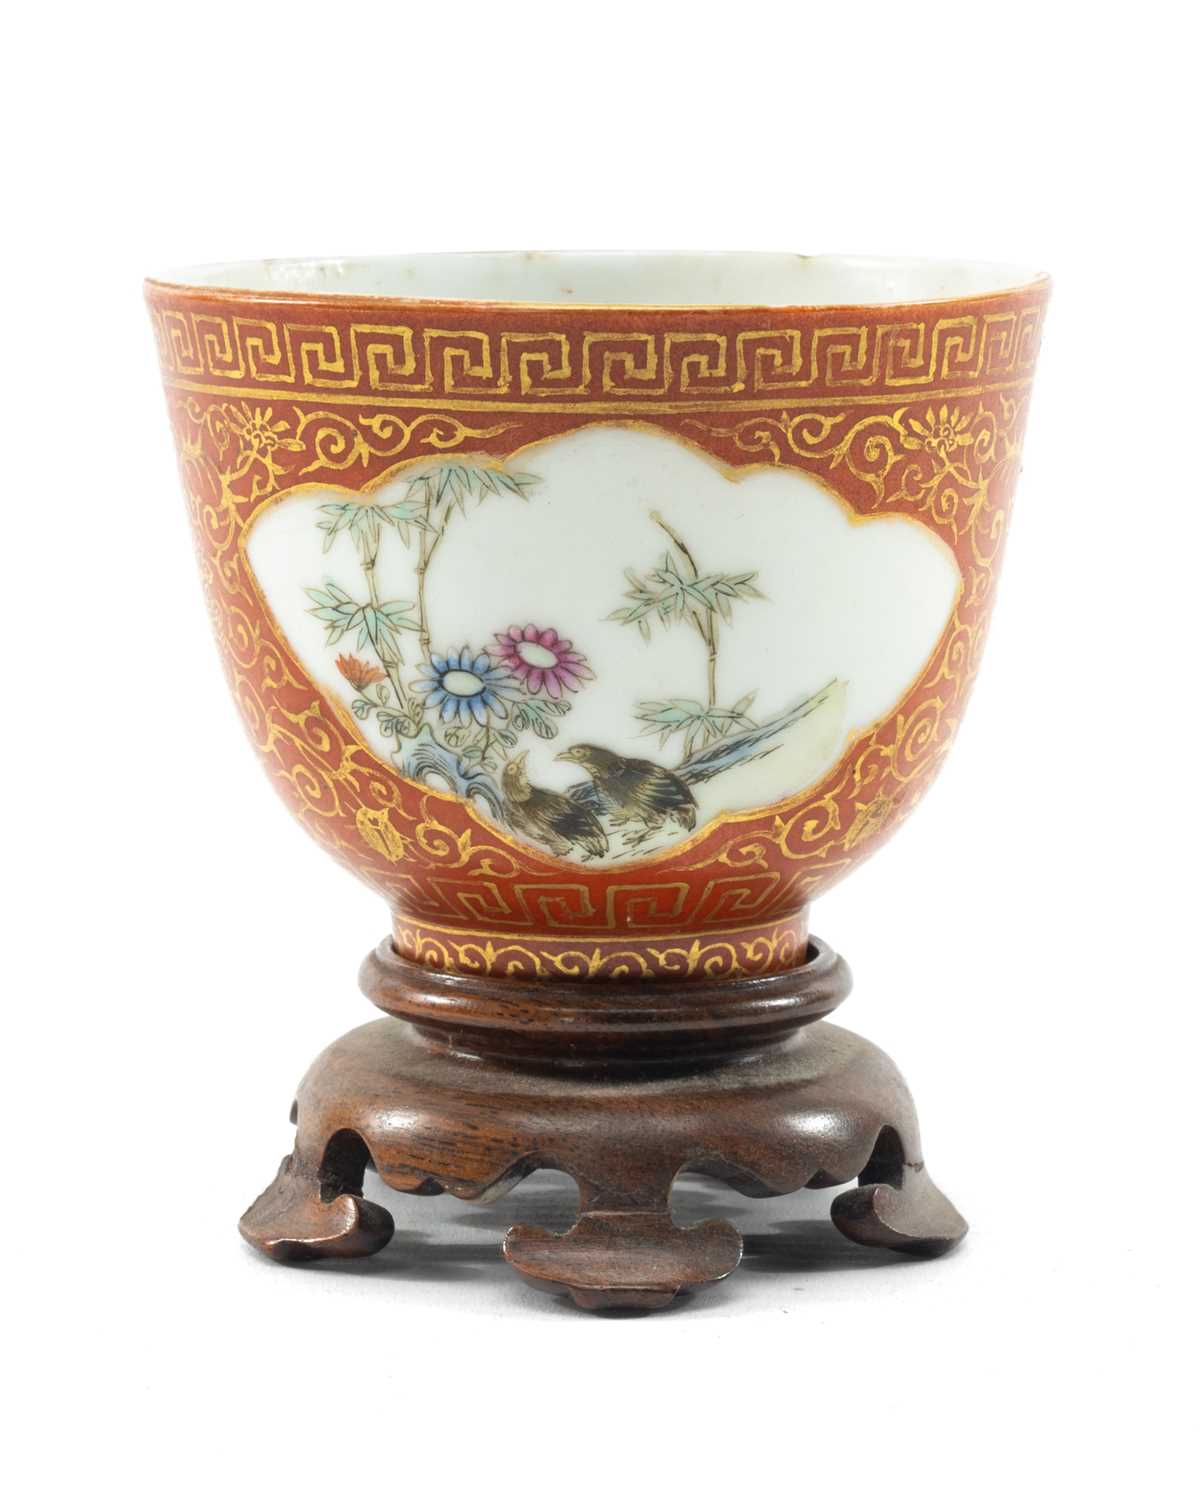 CHINESE CORAL GROUND FAMILLE ROSE TEABOWL, painted with birds and cockerel amid chrysanthemum and